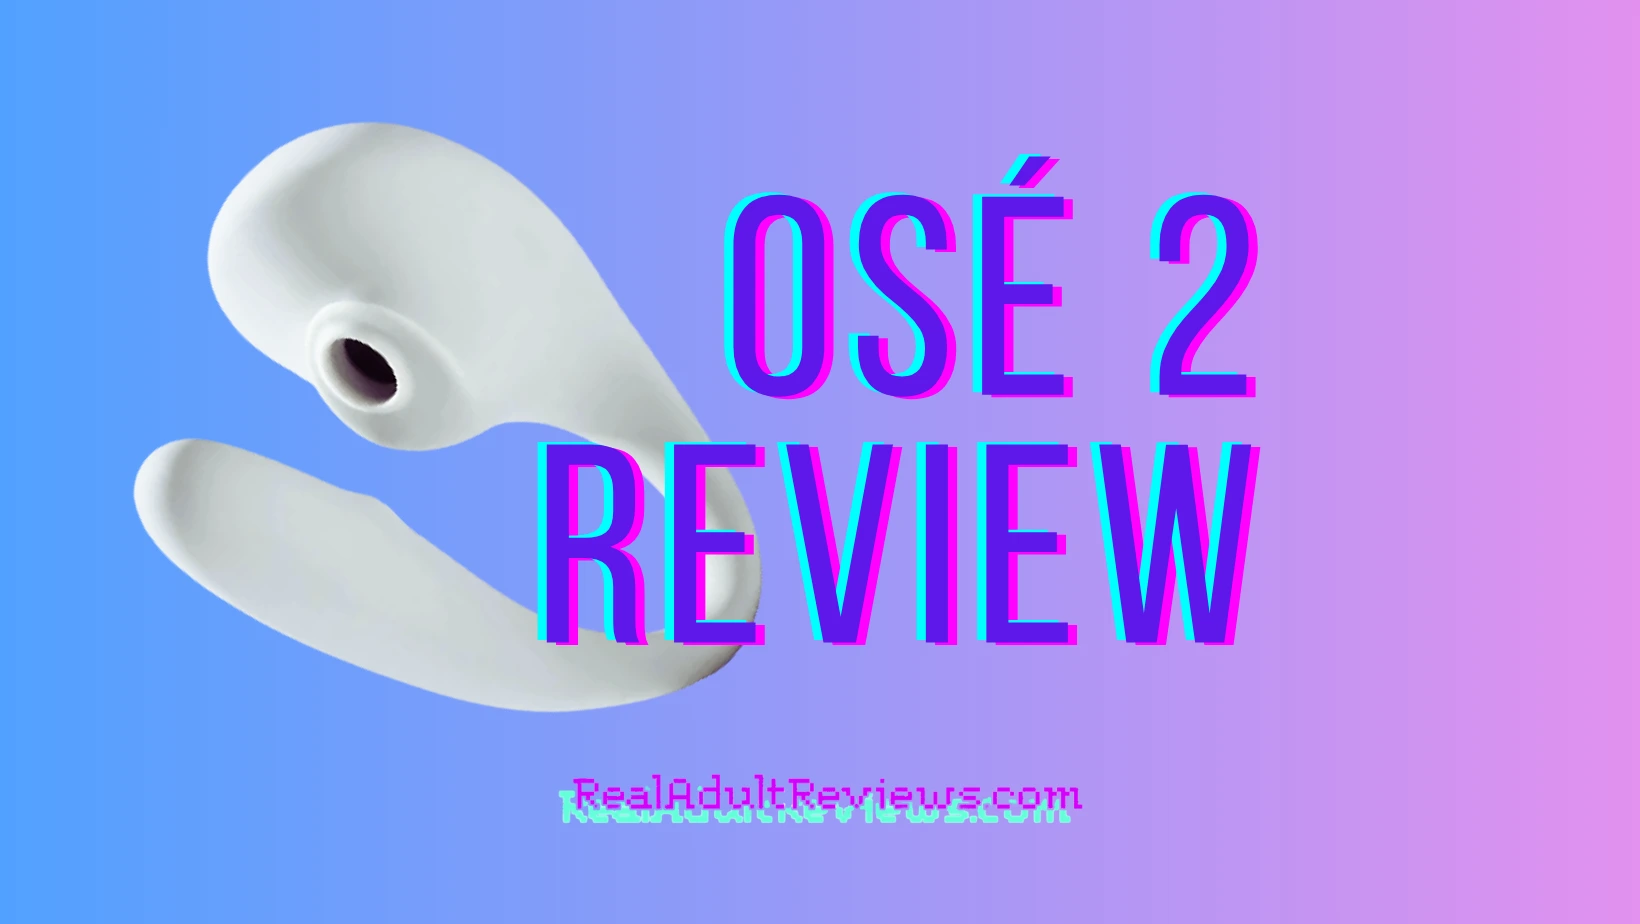 What Is a Double Robot Massager Capable Of? Lora Dicarlo Osé 2 Review